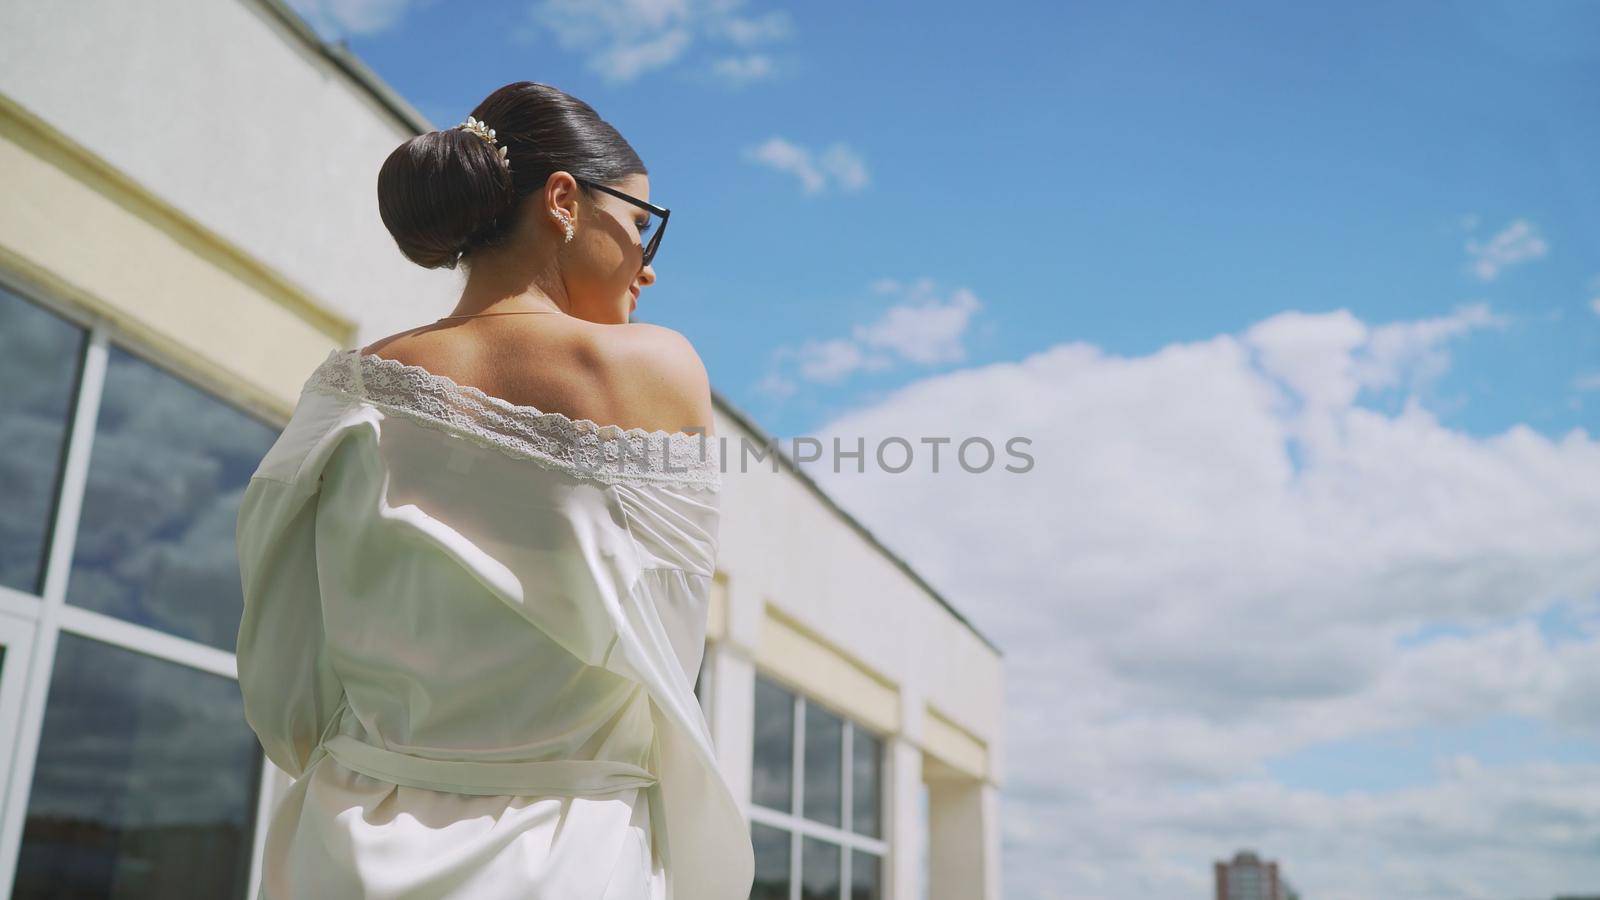 Stylish girl in a white robe on the roof of the hotel. Girl in sunglasses and a white robe. Cute laughing blogger girl in a white coat. Portrait of a sexy charming woman in a robe and sunglasses. Vacation concept.